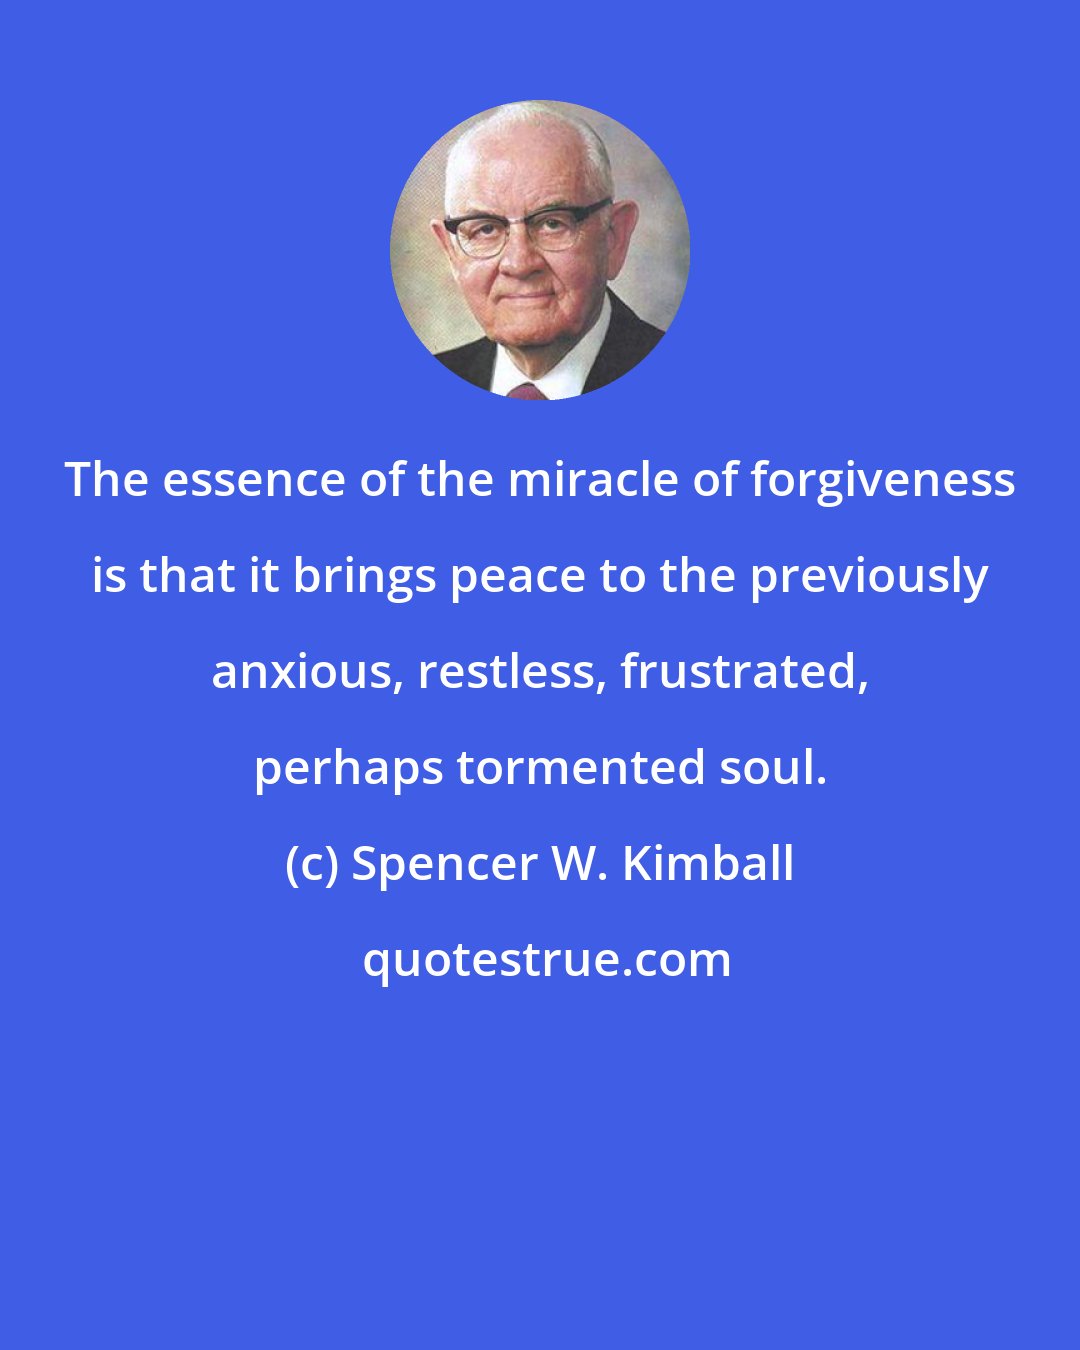 Spencer W. Kimball: The essence of the miracle of forgiveness is that it brings peace to the previously anxious, restless, frustrated, perhaps tormented soul.